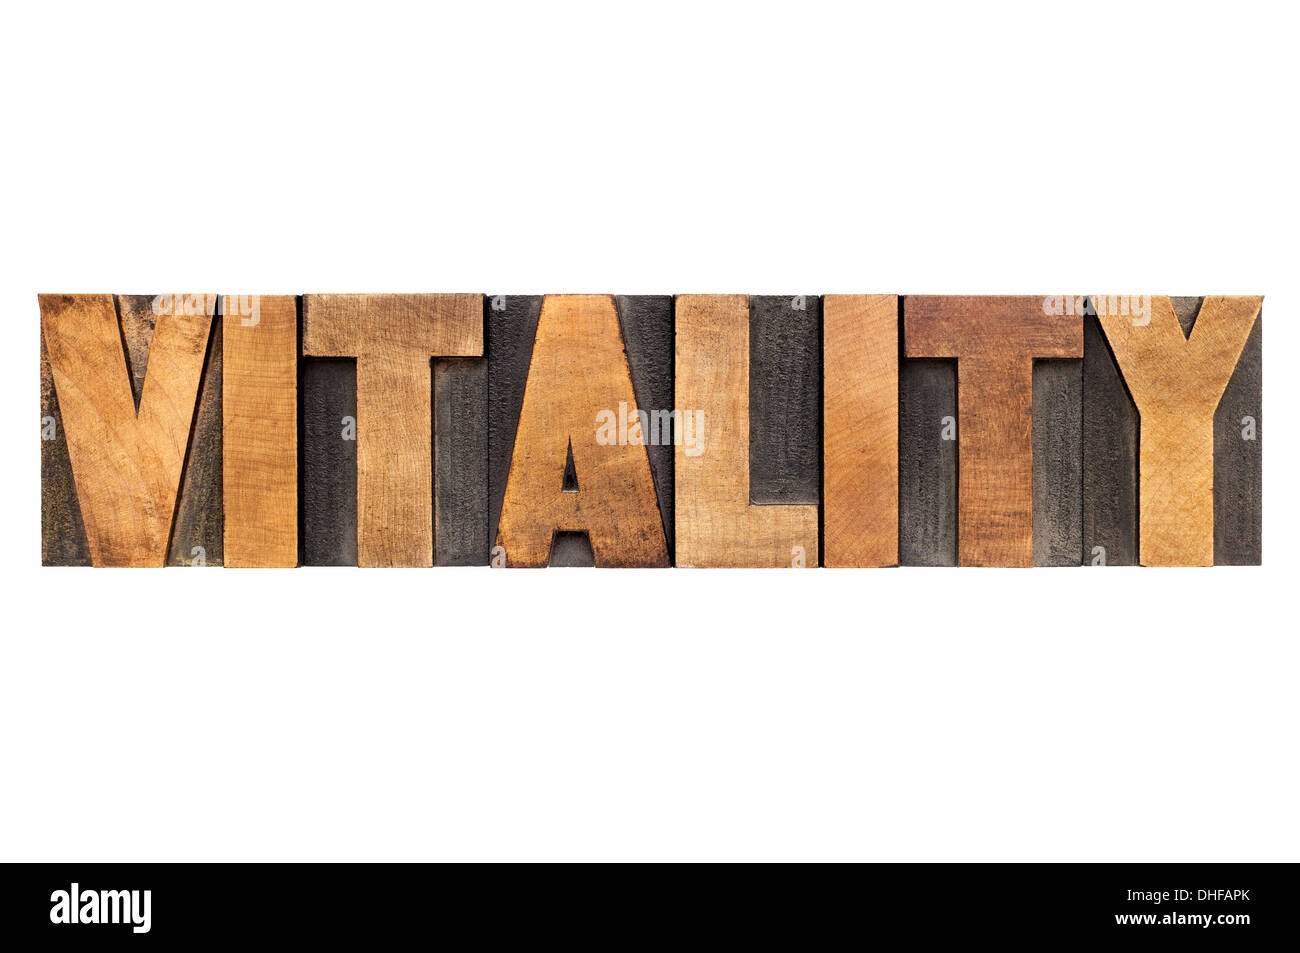 vitality word - isolated text in letterpress wood type Stock Photo